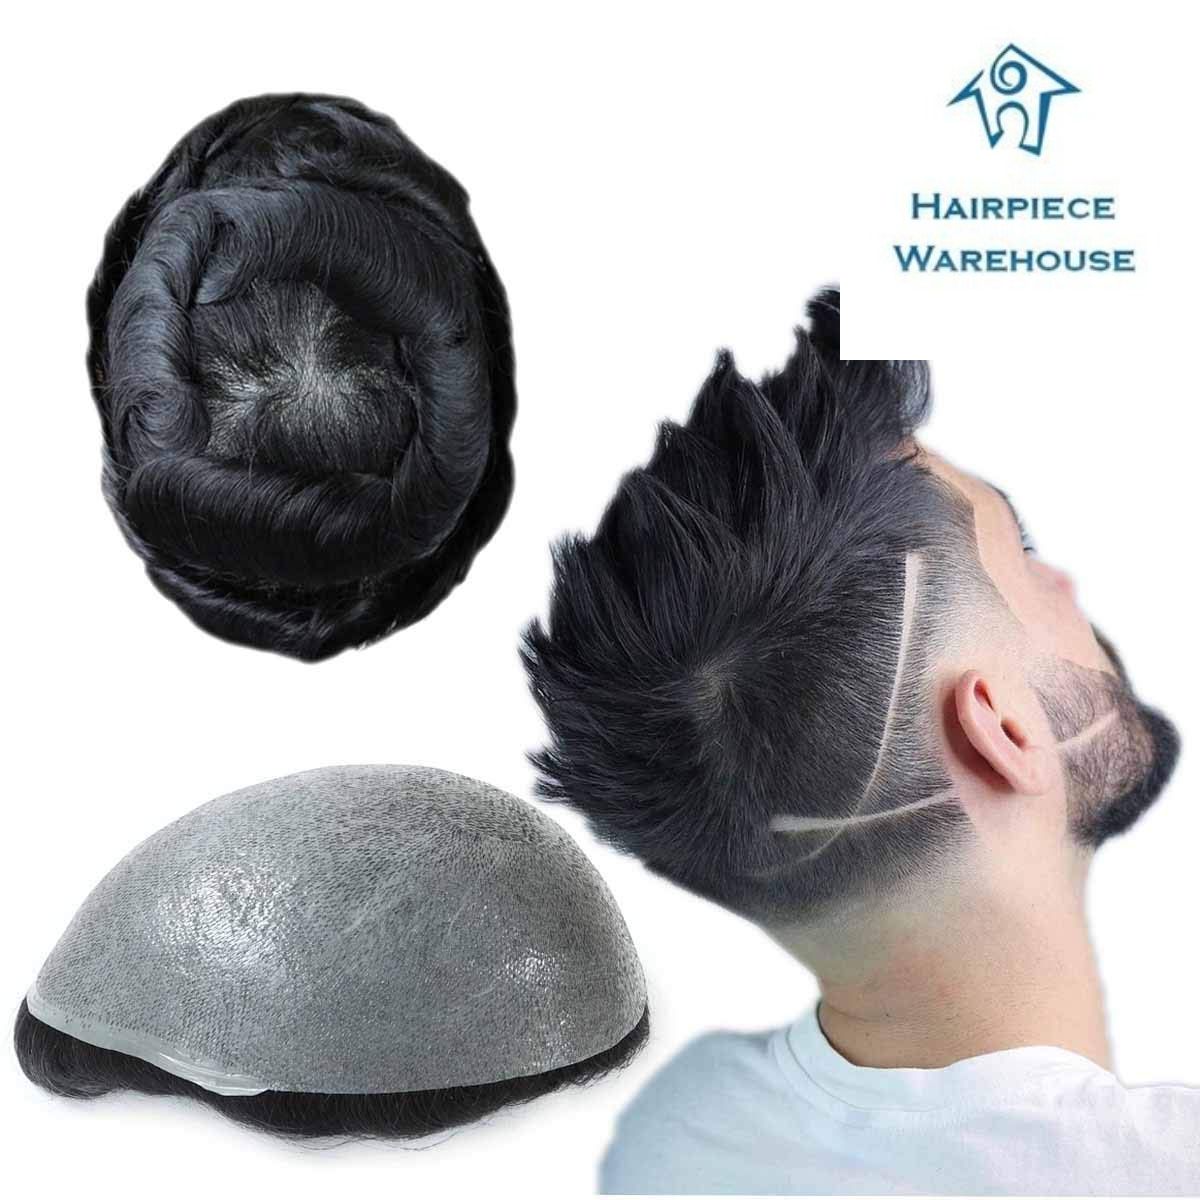 Highlight Your Style with Mens toupee